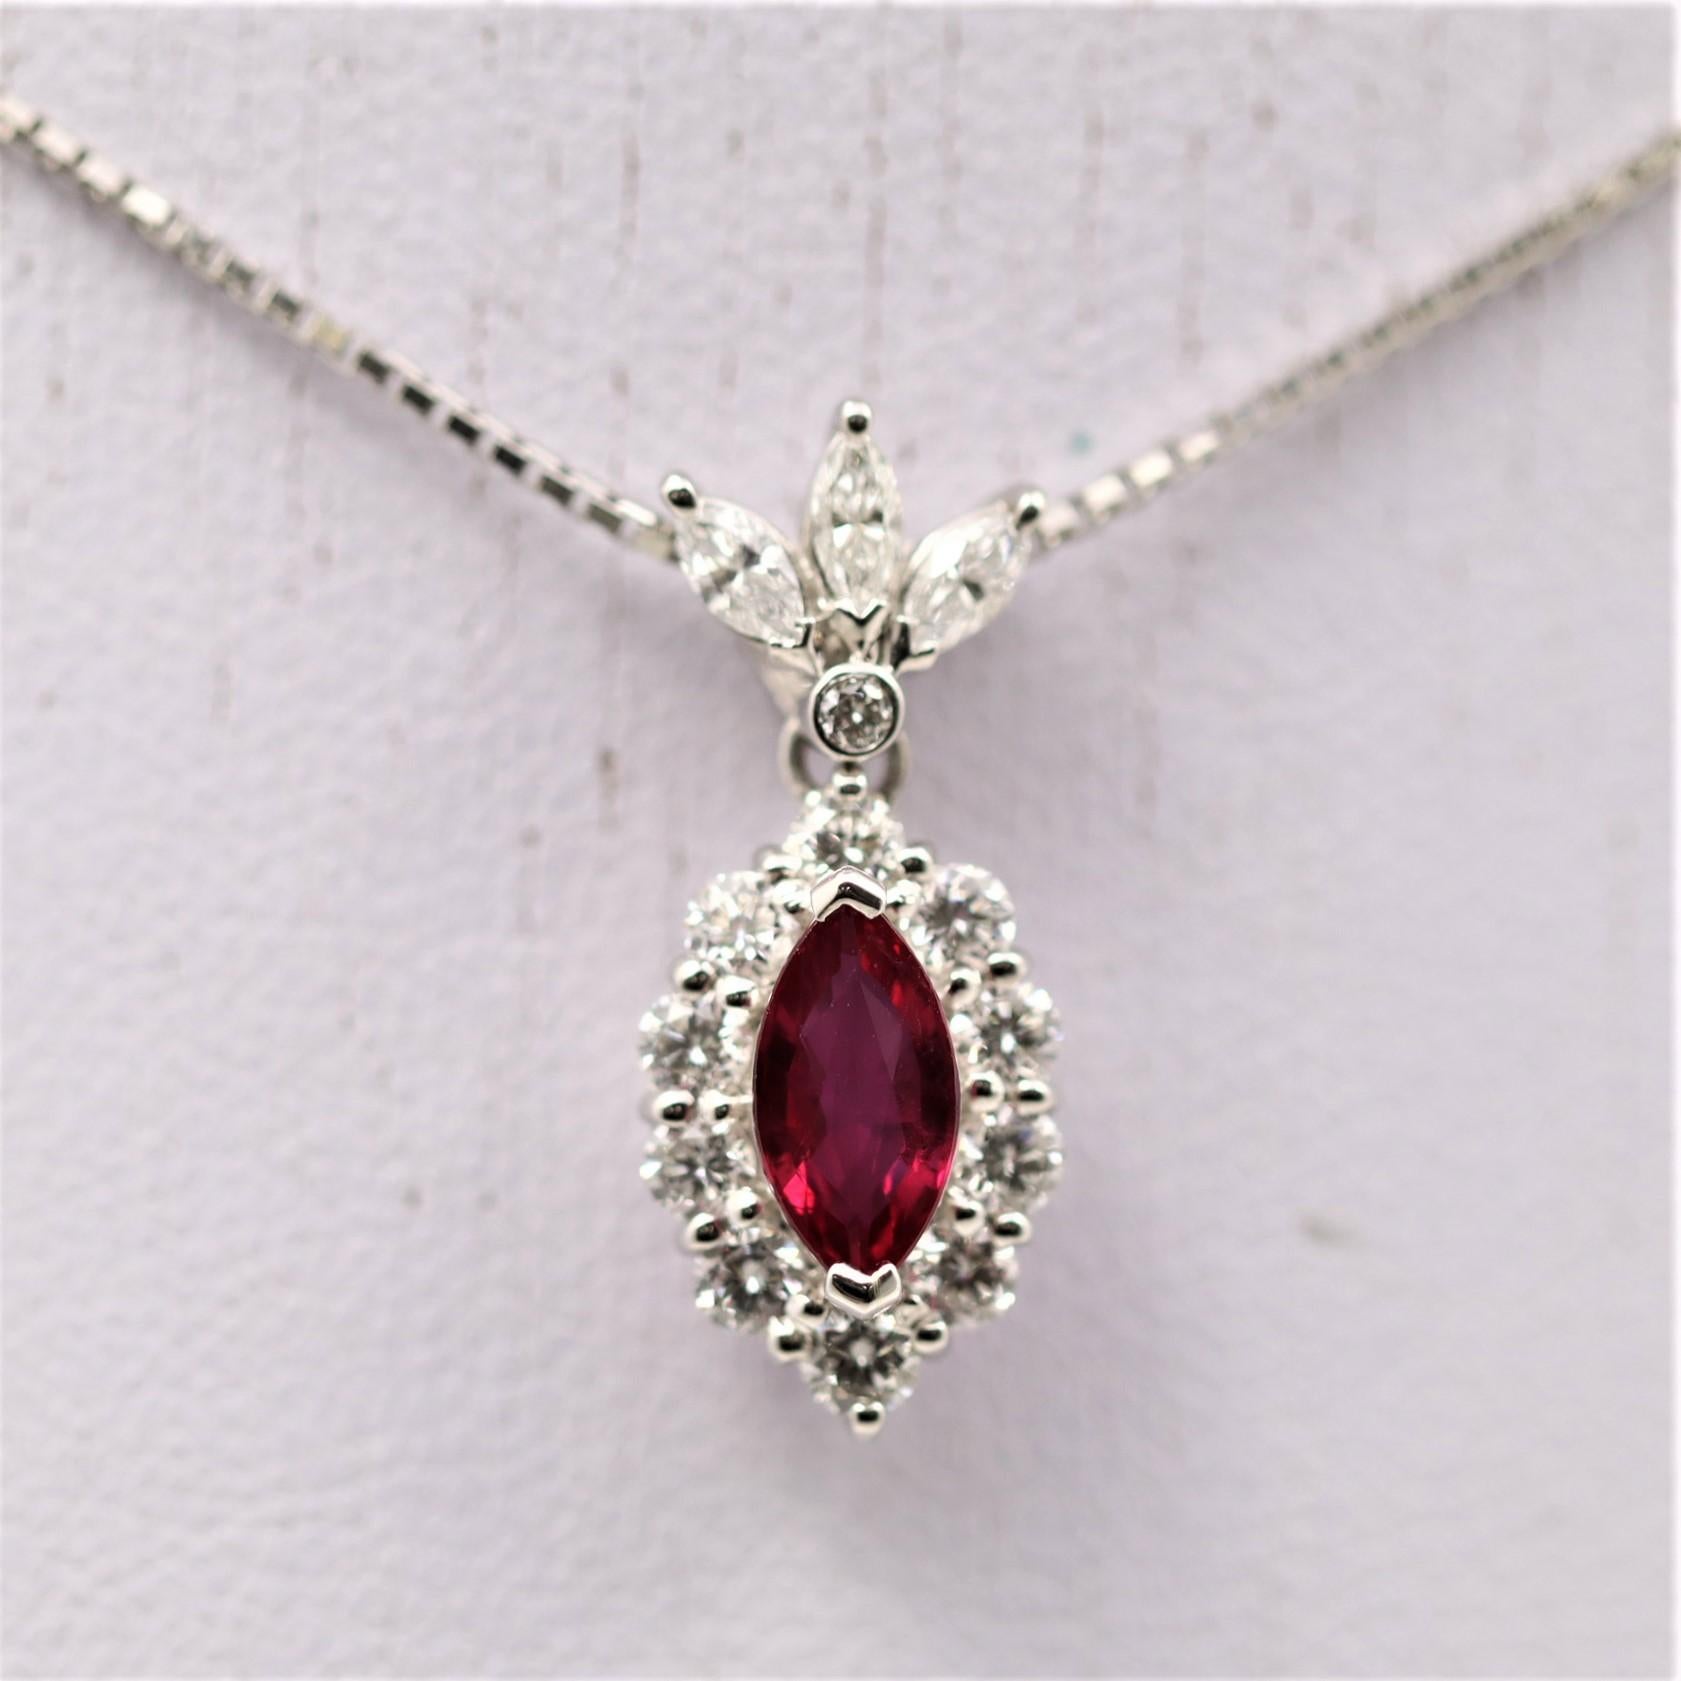 A 7.34 carat natural ruby is the centerpiece to this special pendant. Rubies are the hardest of the big 3 gemstones (ruby, sapphire, emerald). Accenting the center stone in halo setting are round brilliant cut diamonds.
To add more glamour to the